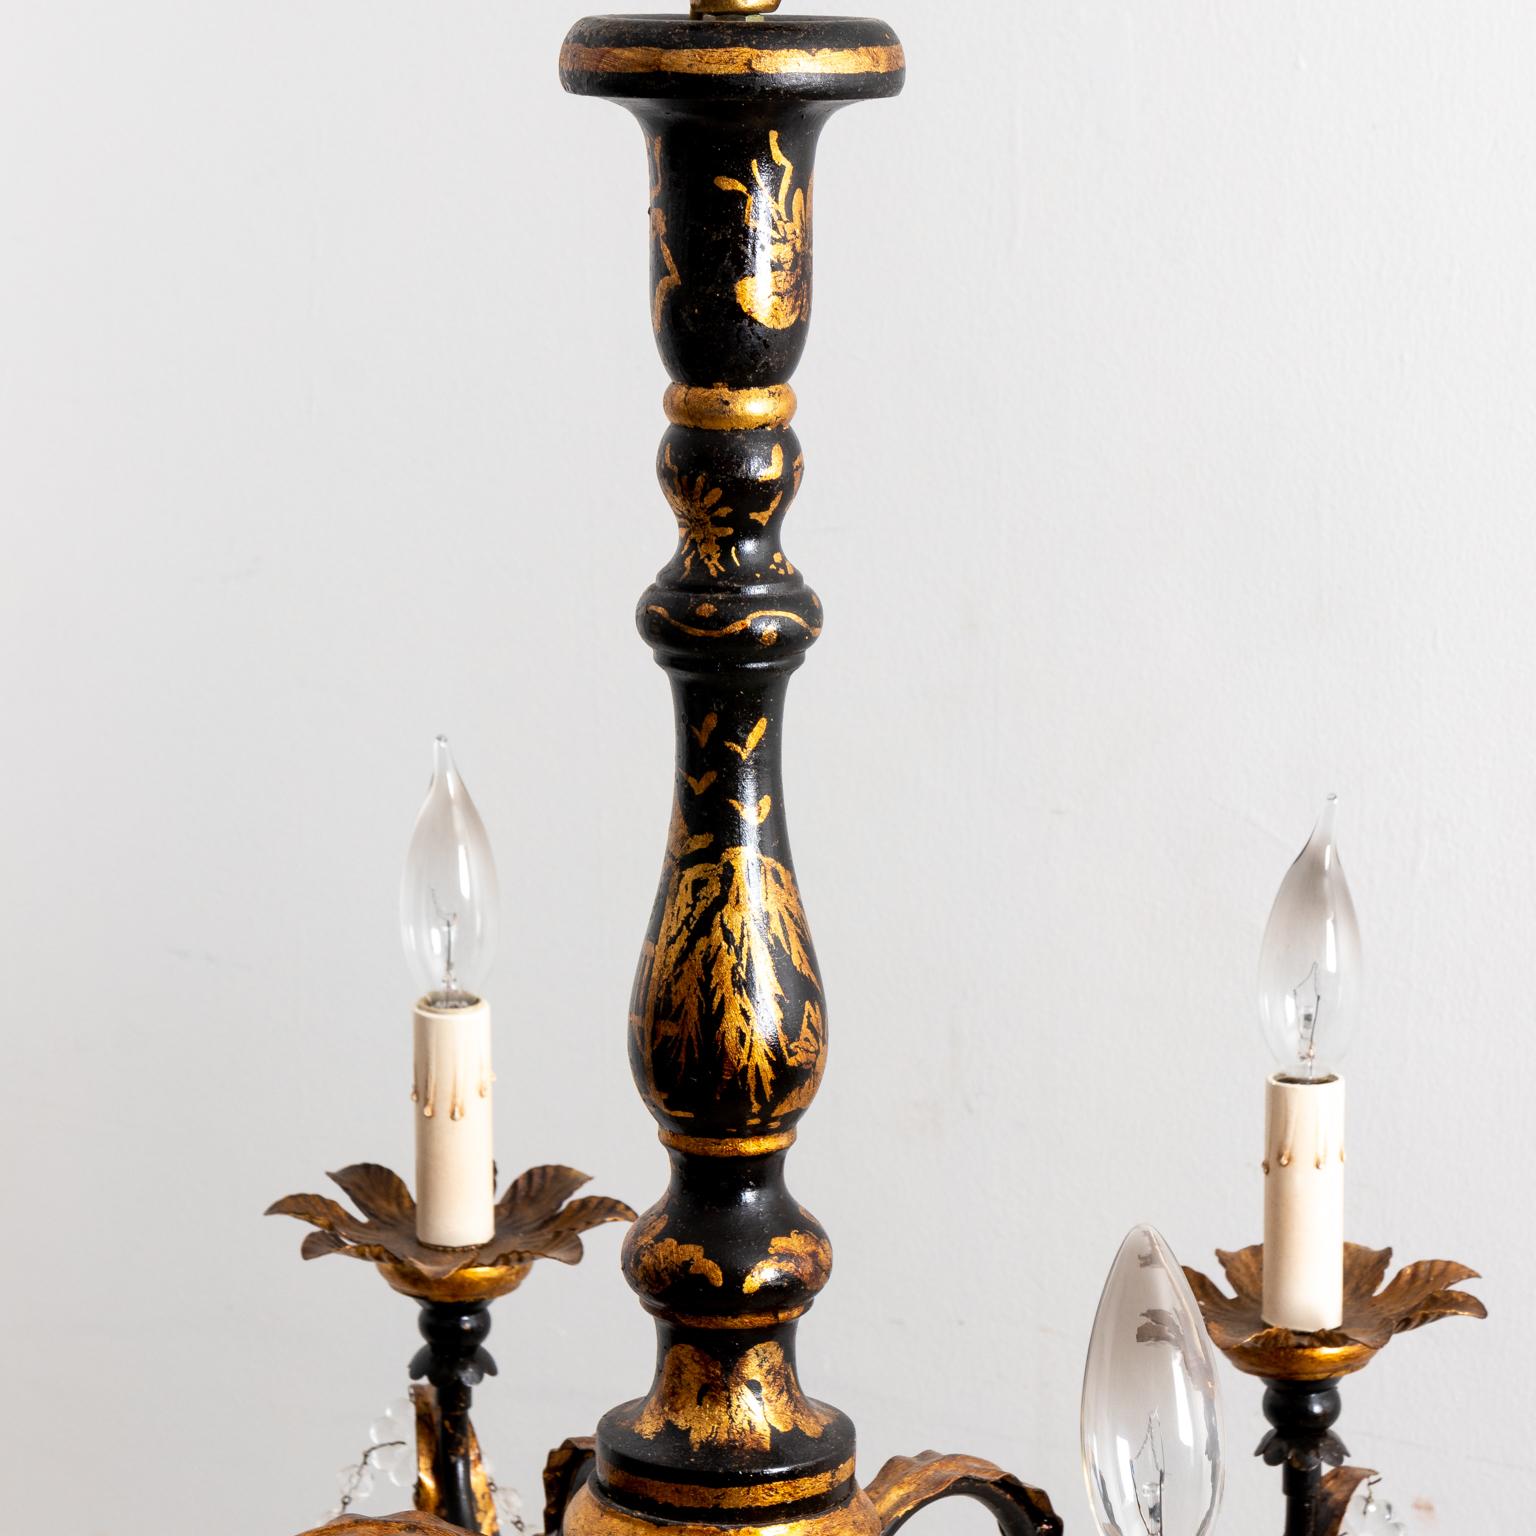 Circa 2000s black Chinoiserie style chandelier by American based lighting and reproduction furniture company called The Federalist. The piece is constructed in metal with wood gold gilt accents, further adorned with draped crystal swags and black